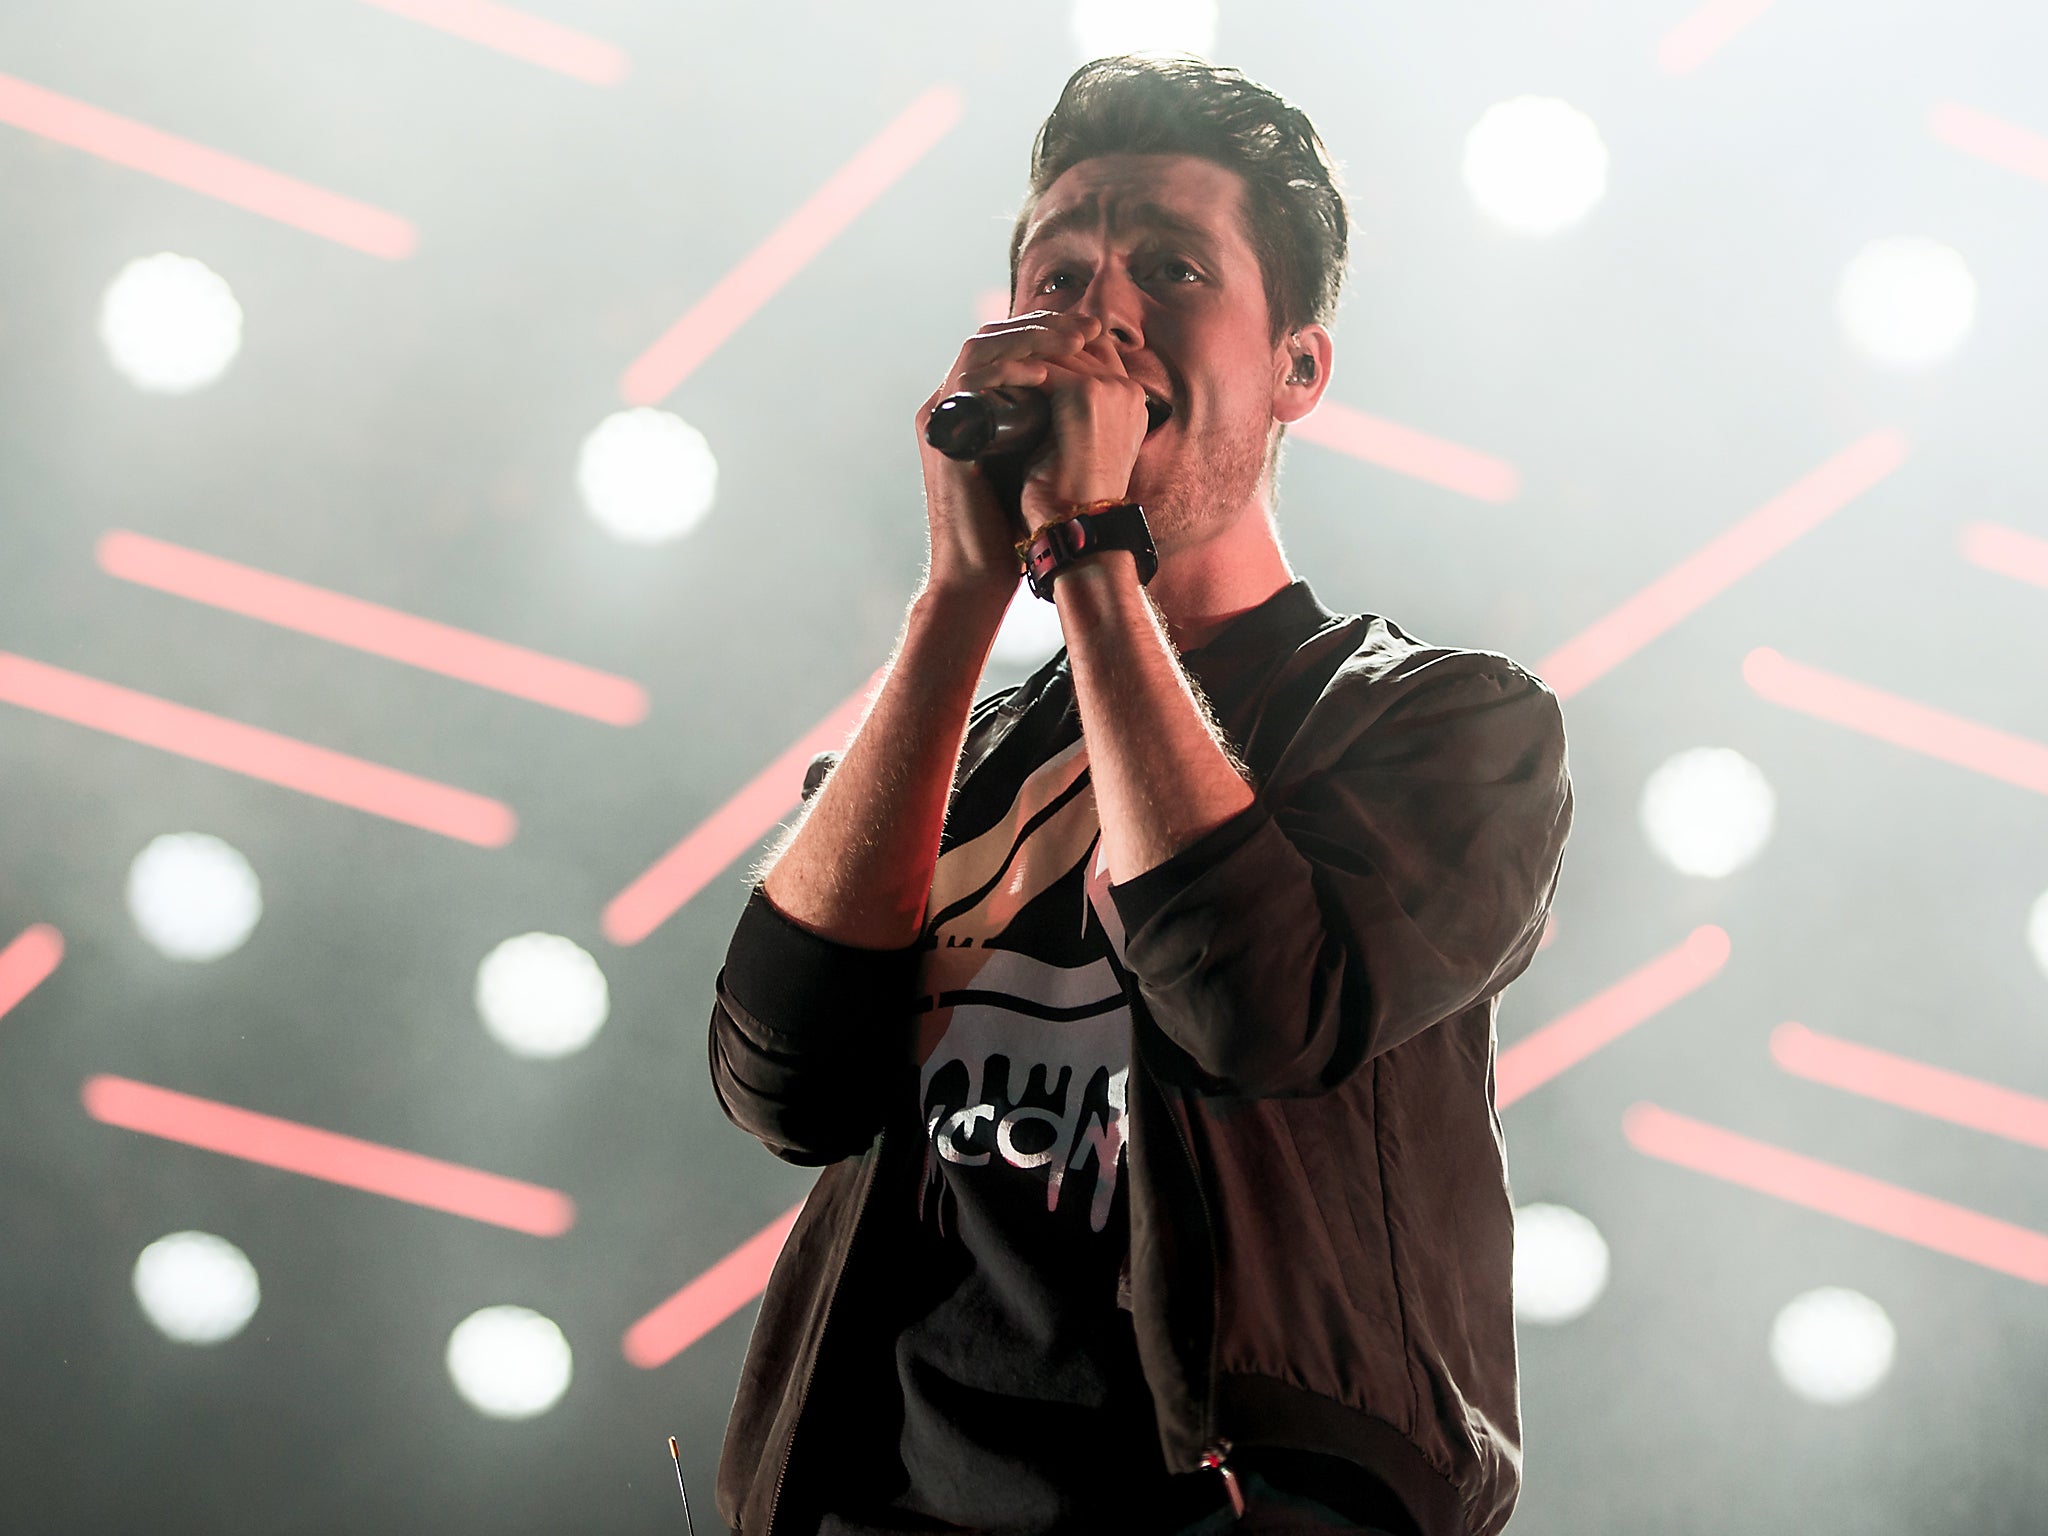 Dan Smith performs with Bastille at the O2 Arena, London